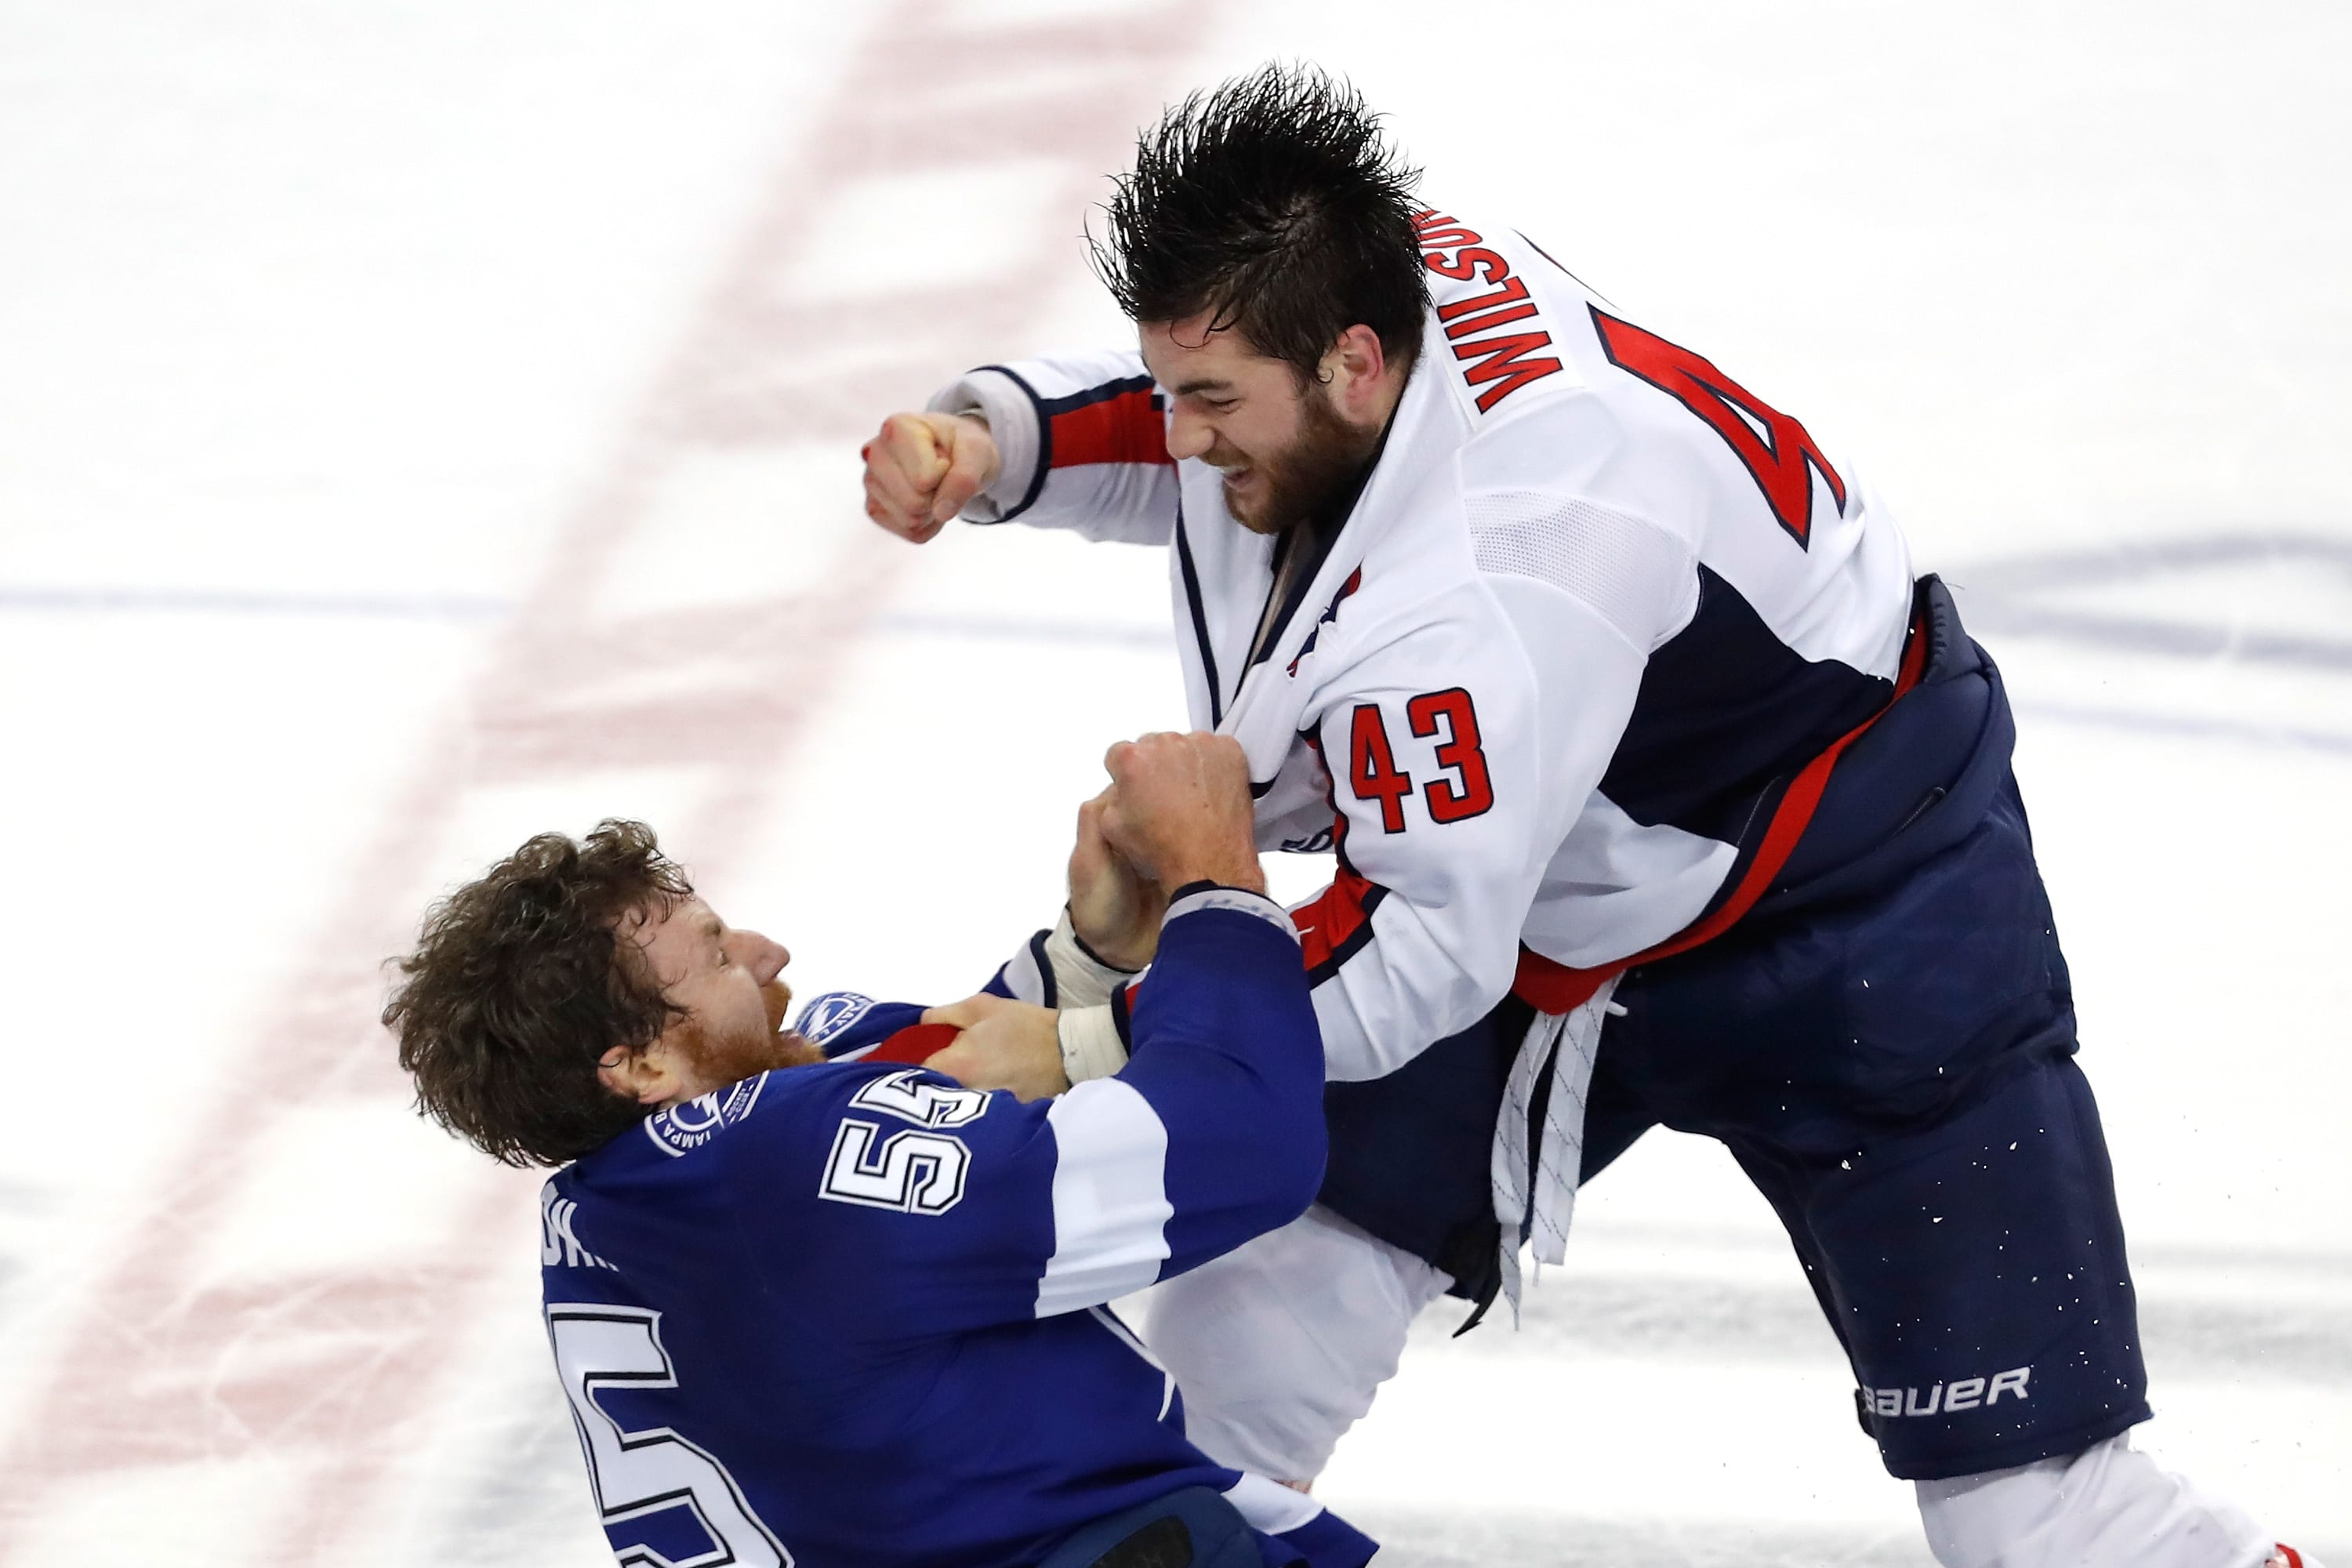 Braydon Coburn #55 of the Tampa Bay Lightning fights with Tom Wilson #43 of the Washington Capitals during the first period in Game Seven of the Eastern Conference Finals during the 2018 NHL Stanley Cup Playoffs at Amalie Arena on May 23, 2018 in Tampa, Florida